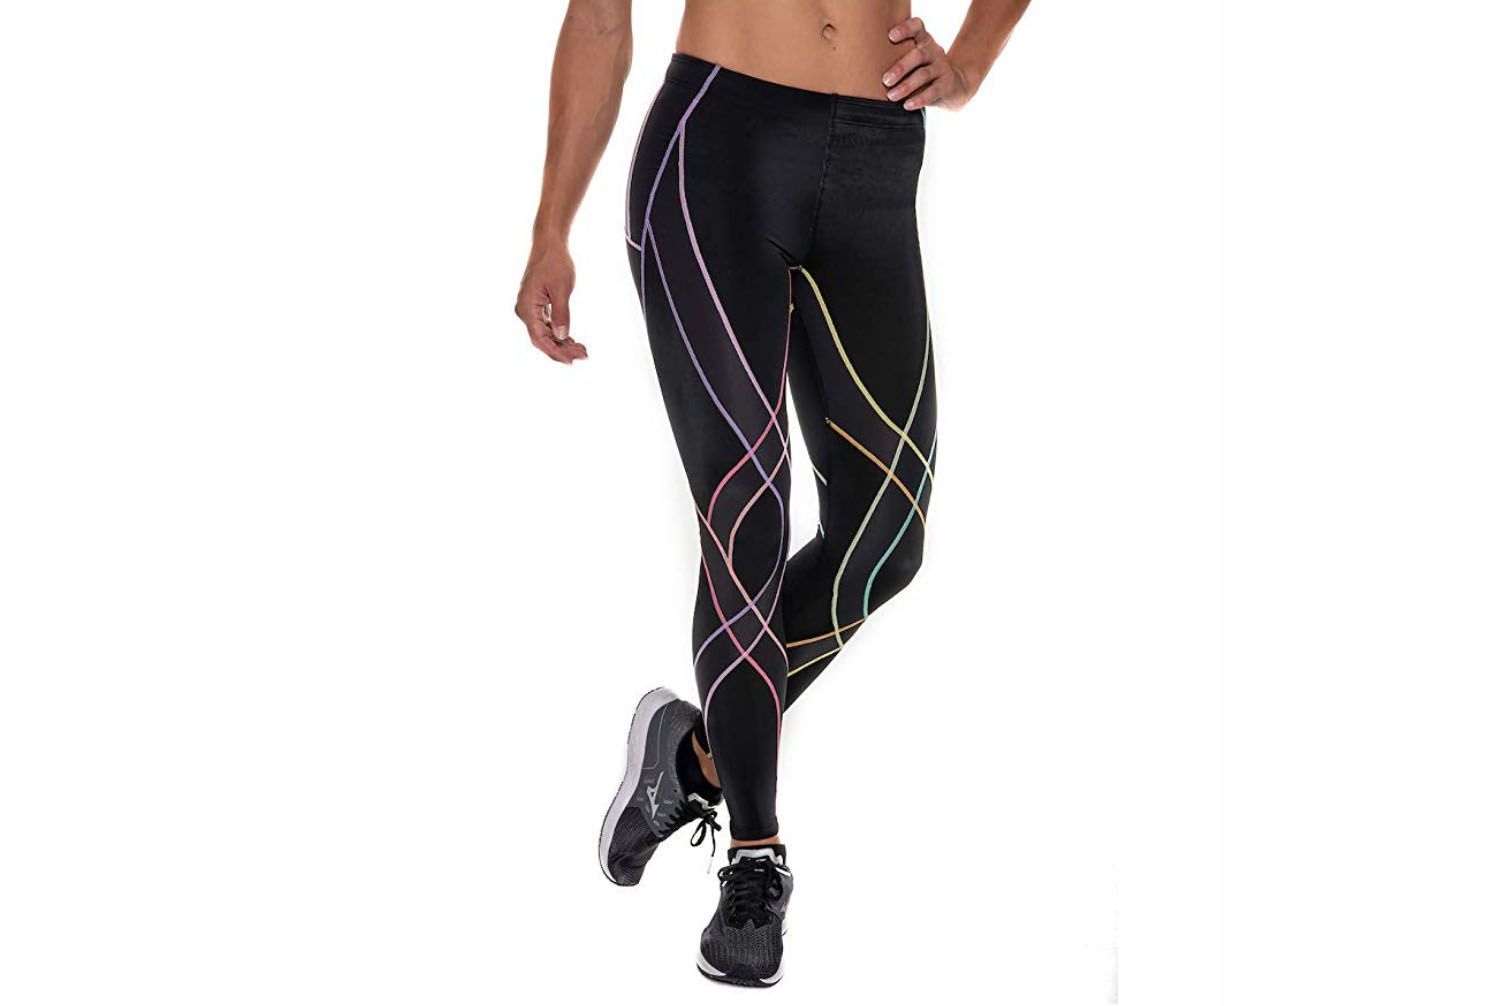 Best Compression Leggings For Circulation